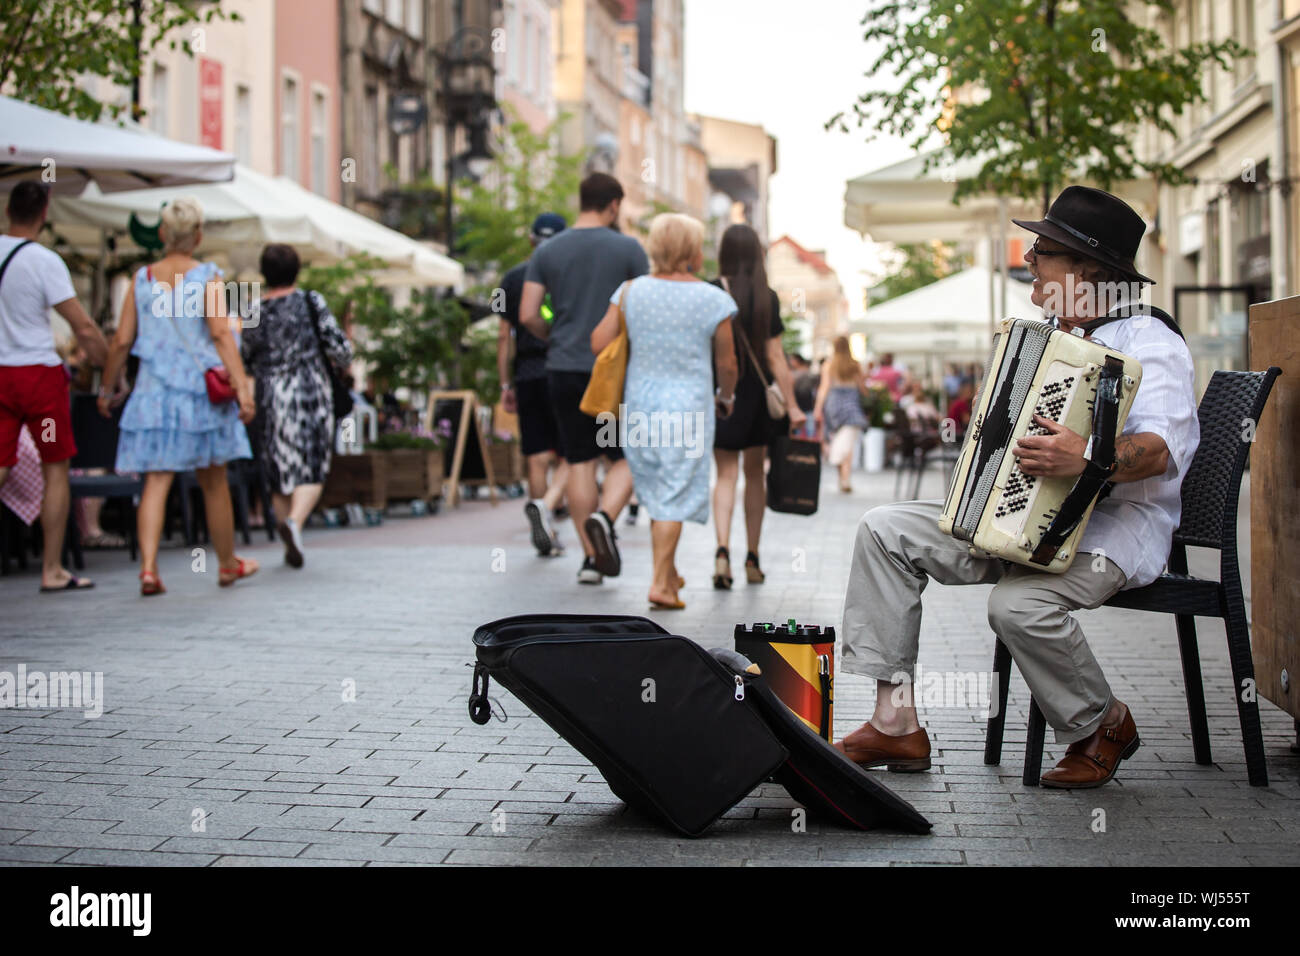 An accordion player performing on the street in the city center. Stock Photo